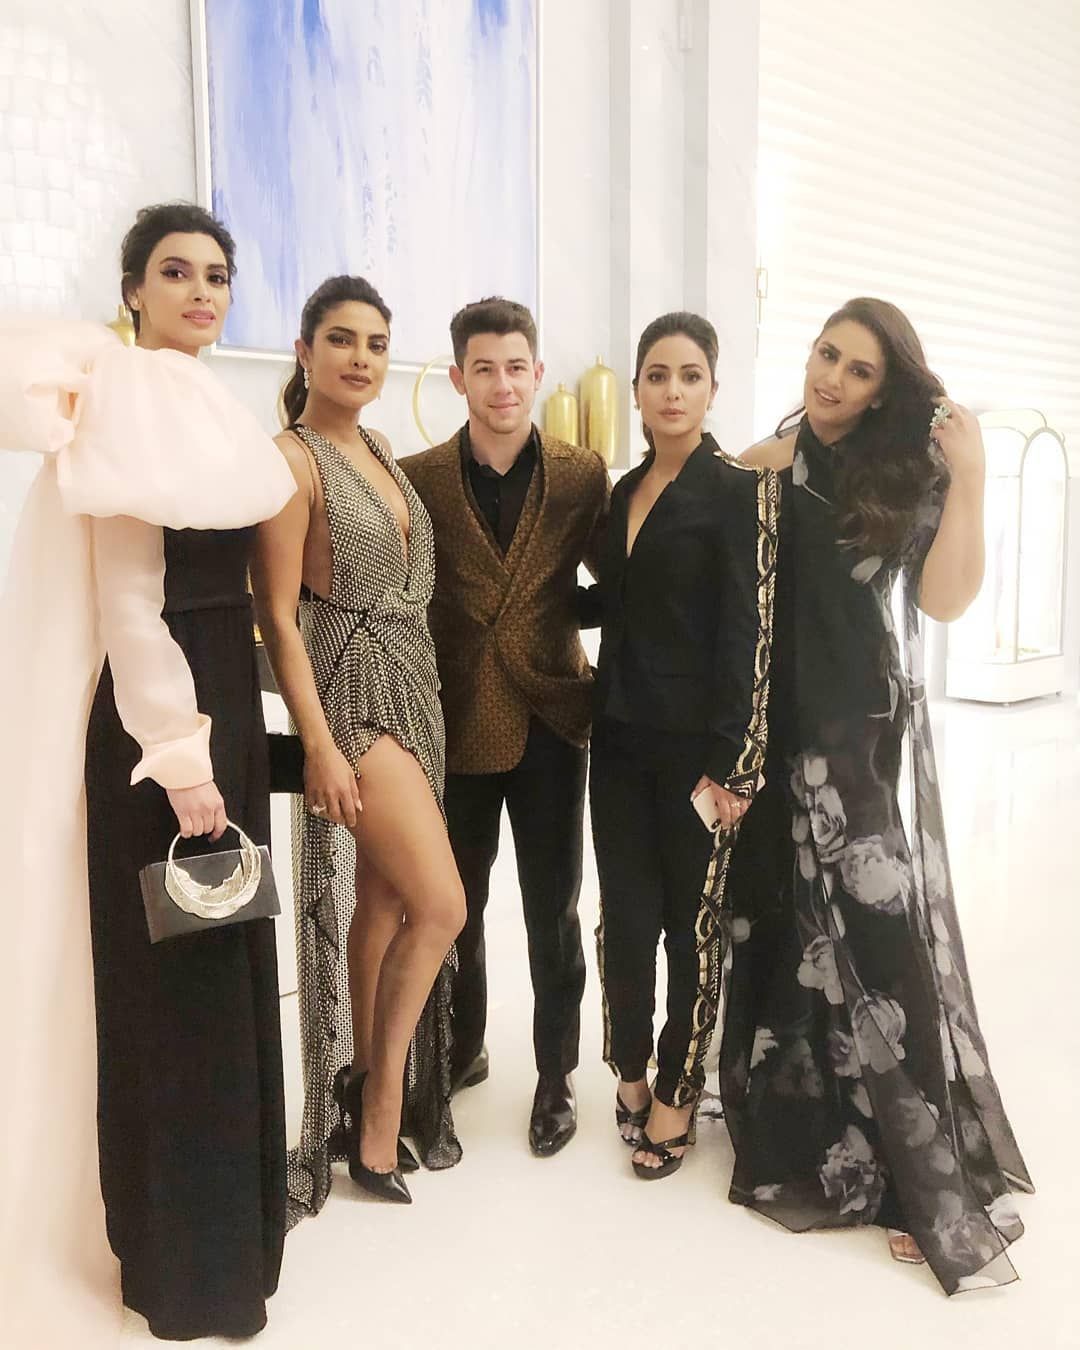 Cannes 2019: Priyanka-Nick Chilling With Diana Penty, Huma Qureshi And Hina Khan Is The Pic Of The Day!